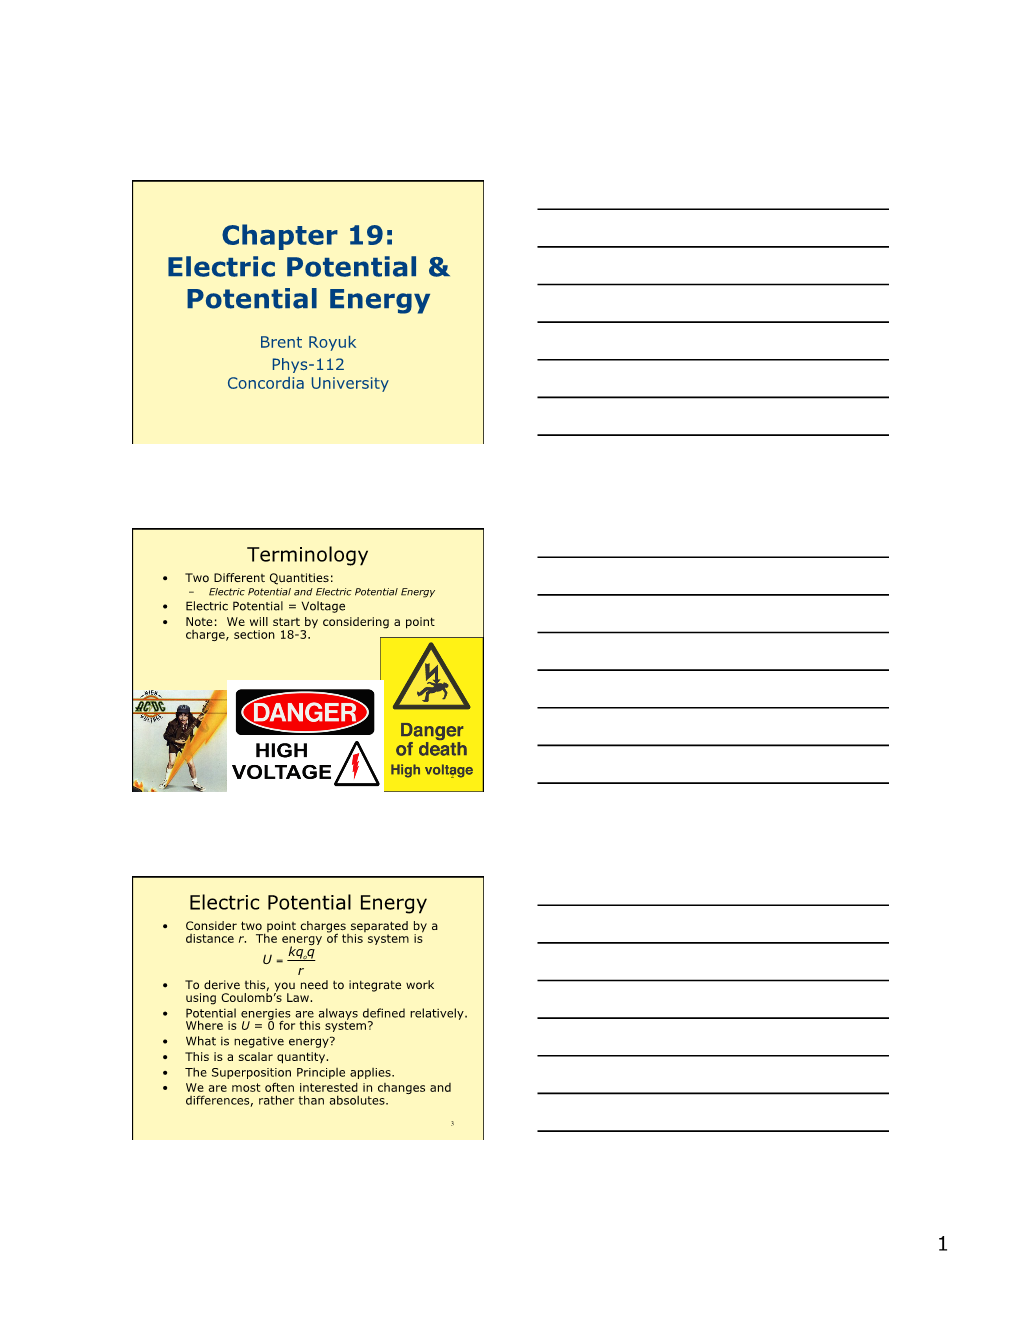 Electric Potential & Potential Energy